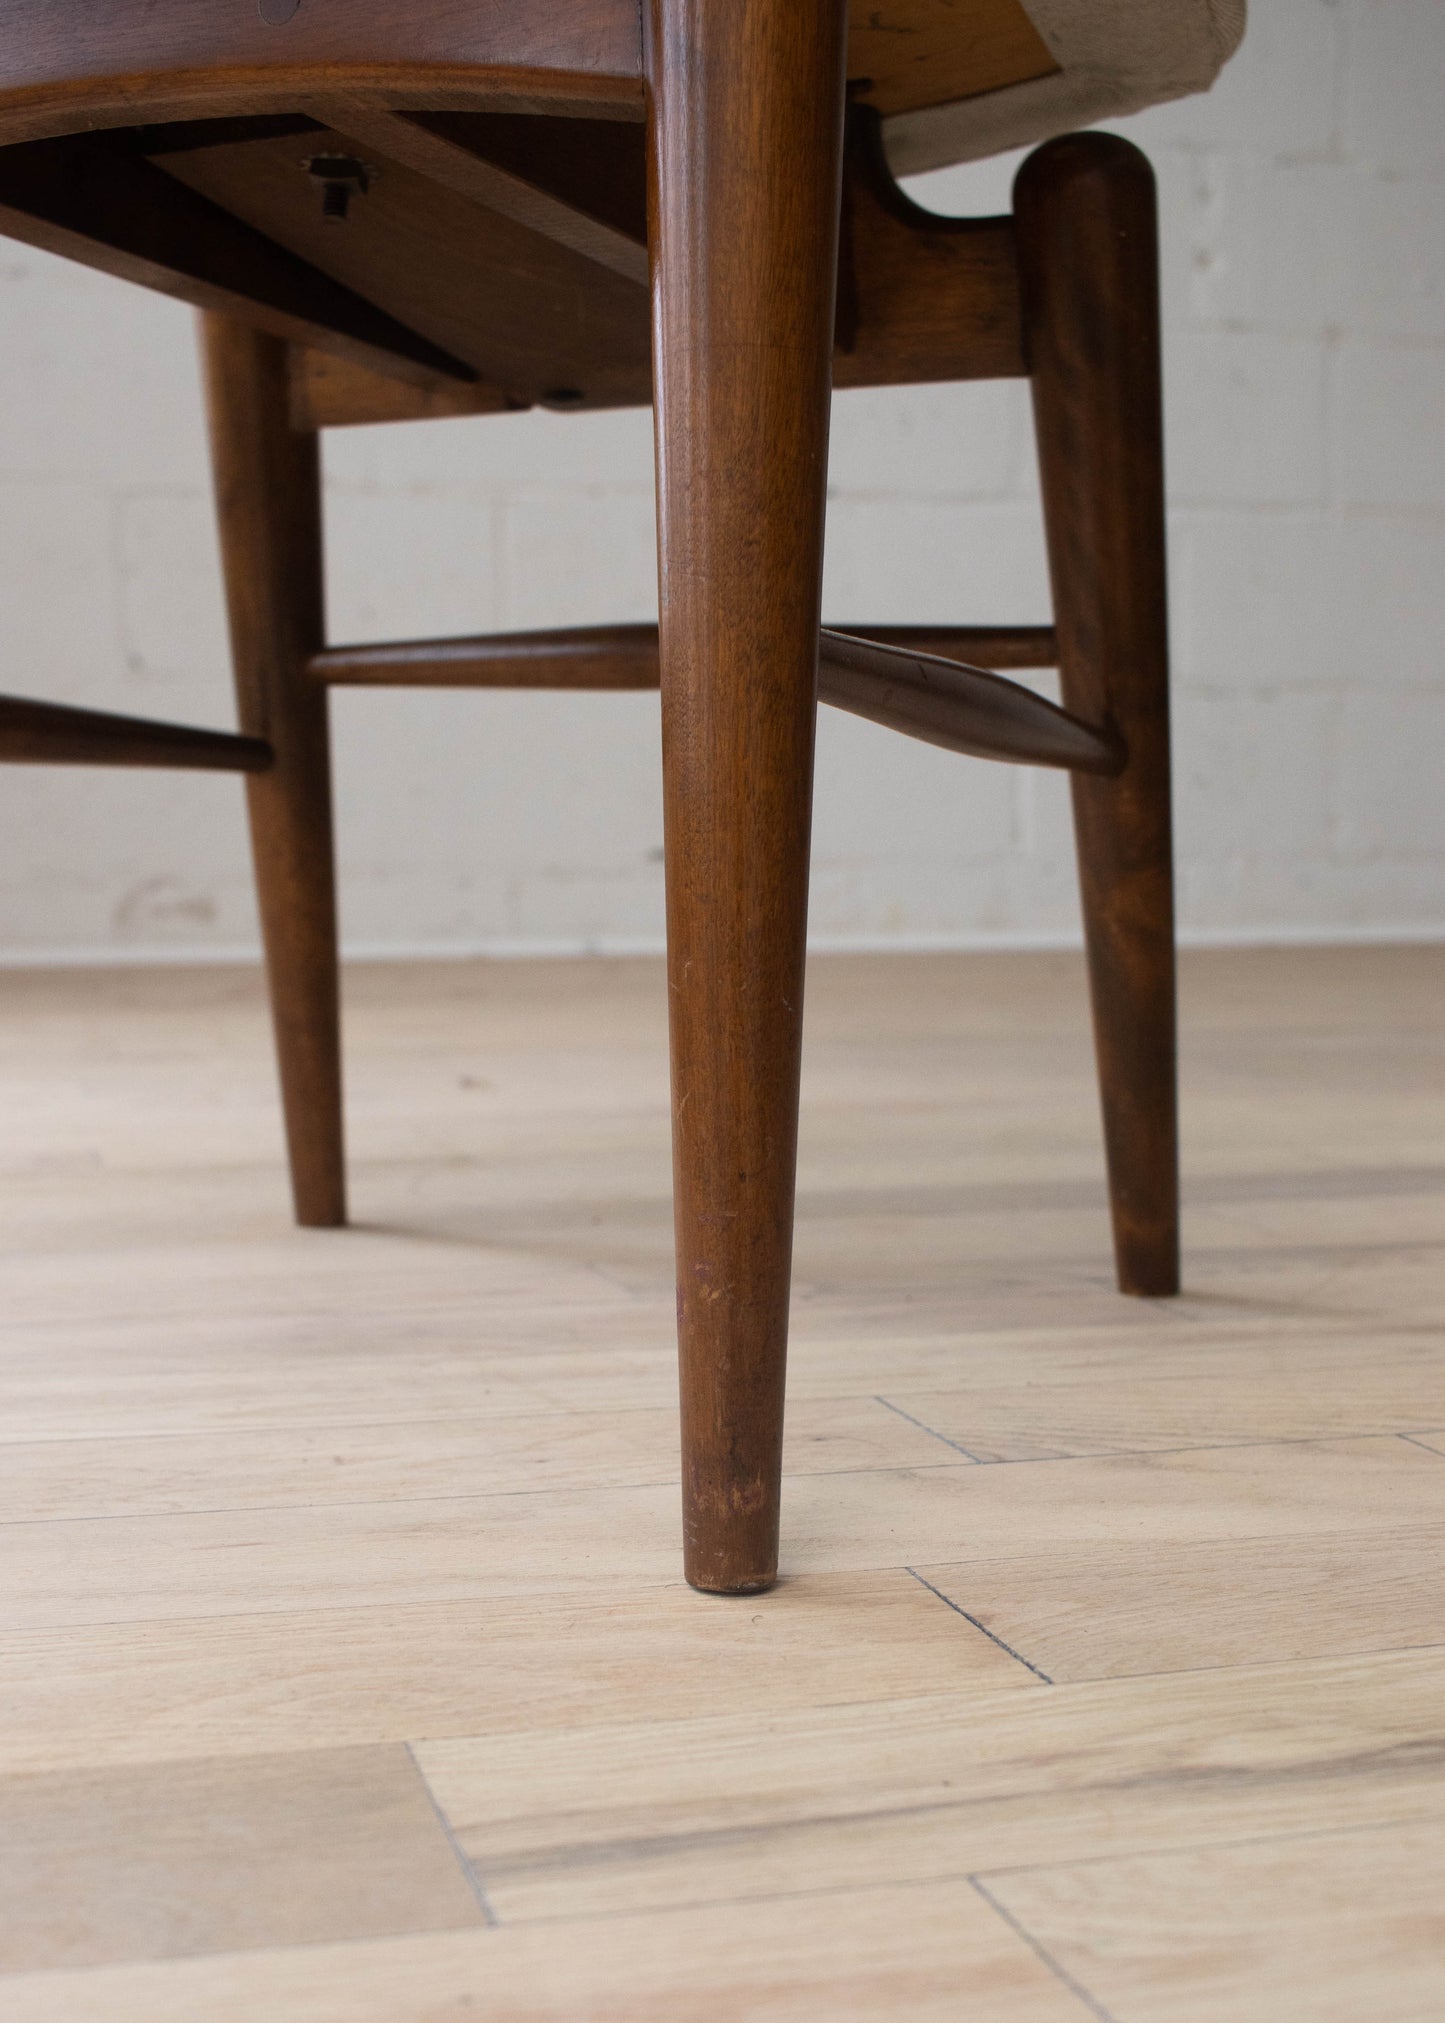 Vintage 1960s/1970s Mid-Century Modern Dining Chair